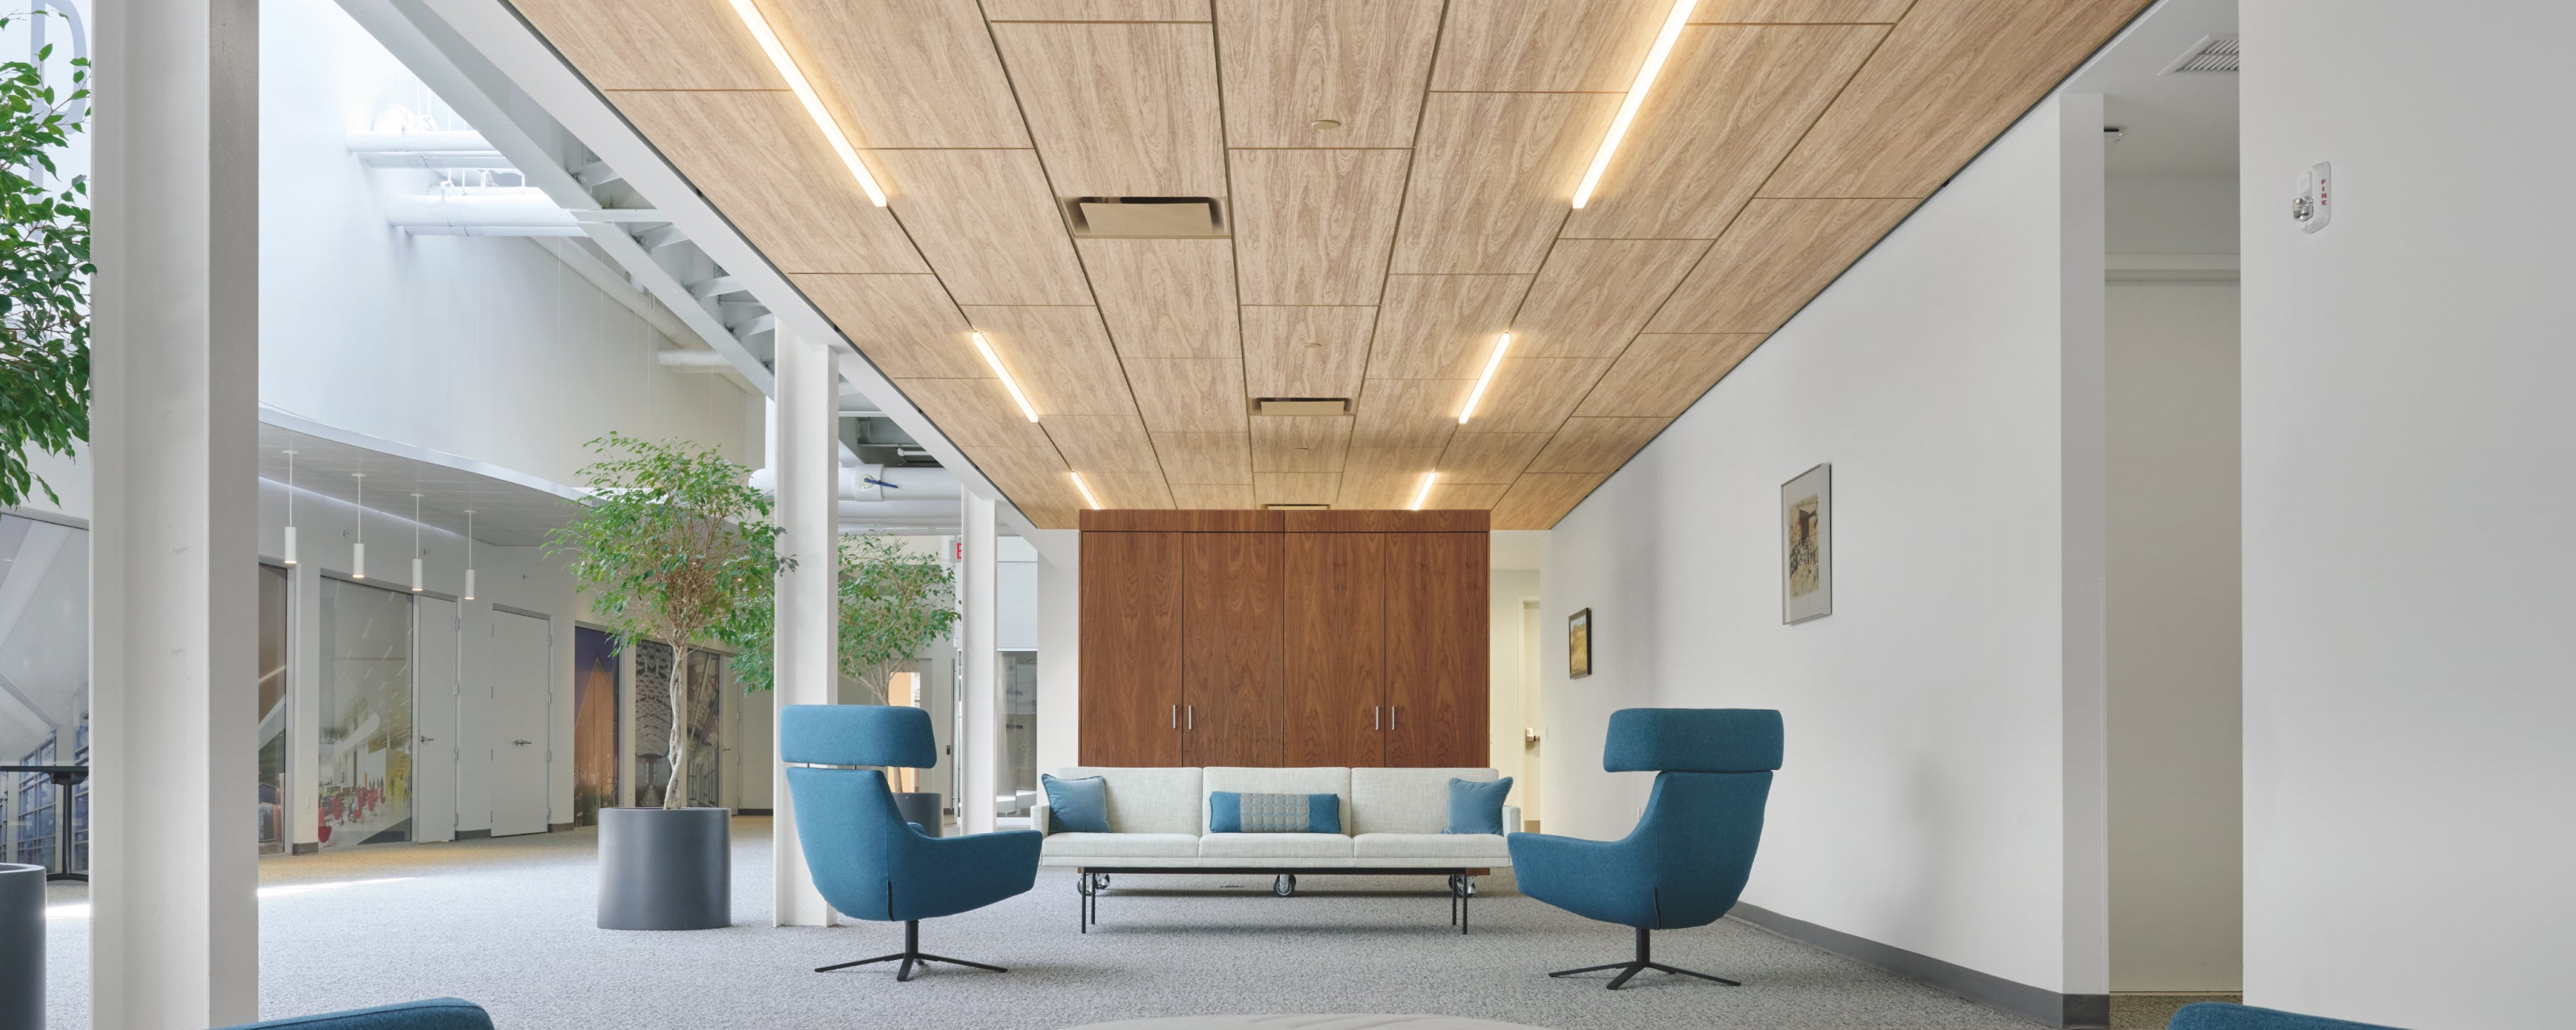 4 Specialty Commercial Ceiling Renovation Ideas